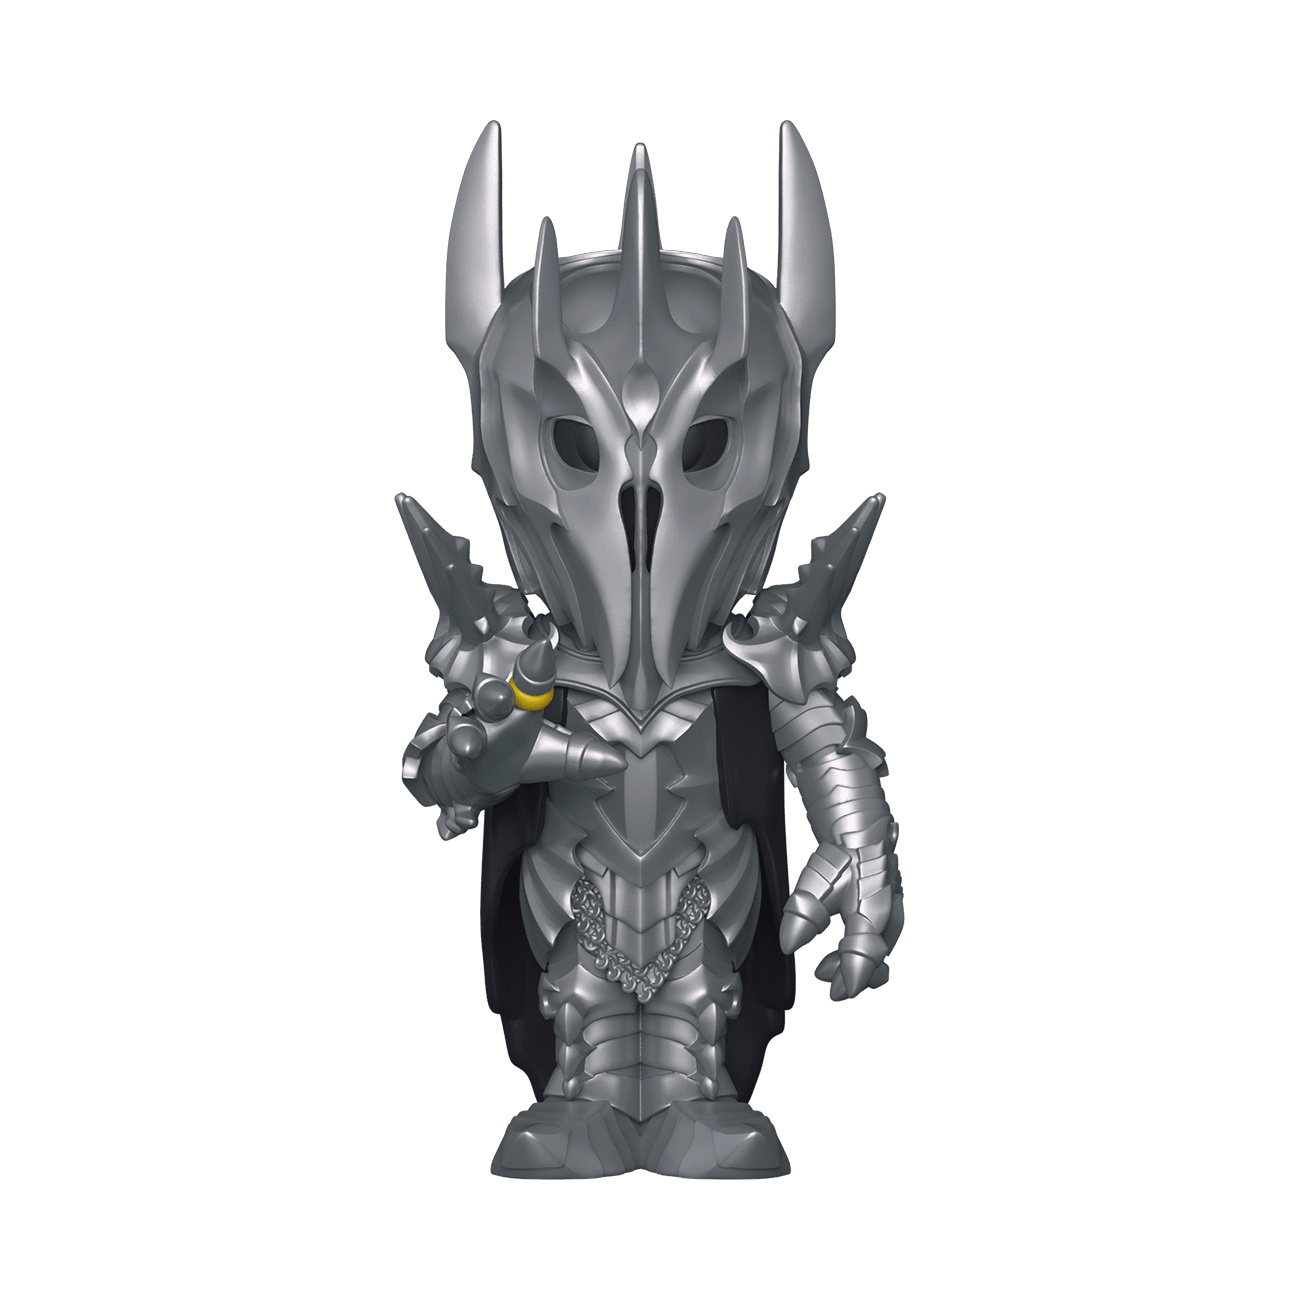 Funko The Lord of the Rings Sauron Vinyl Soda Figure Limited Edition